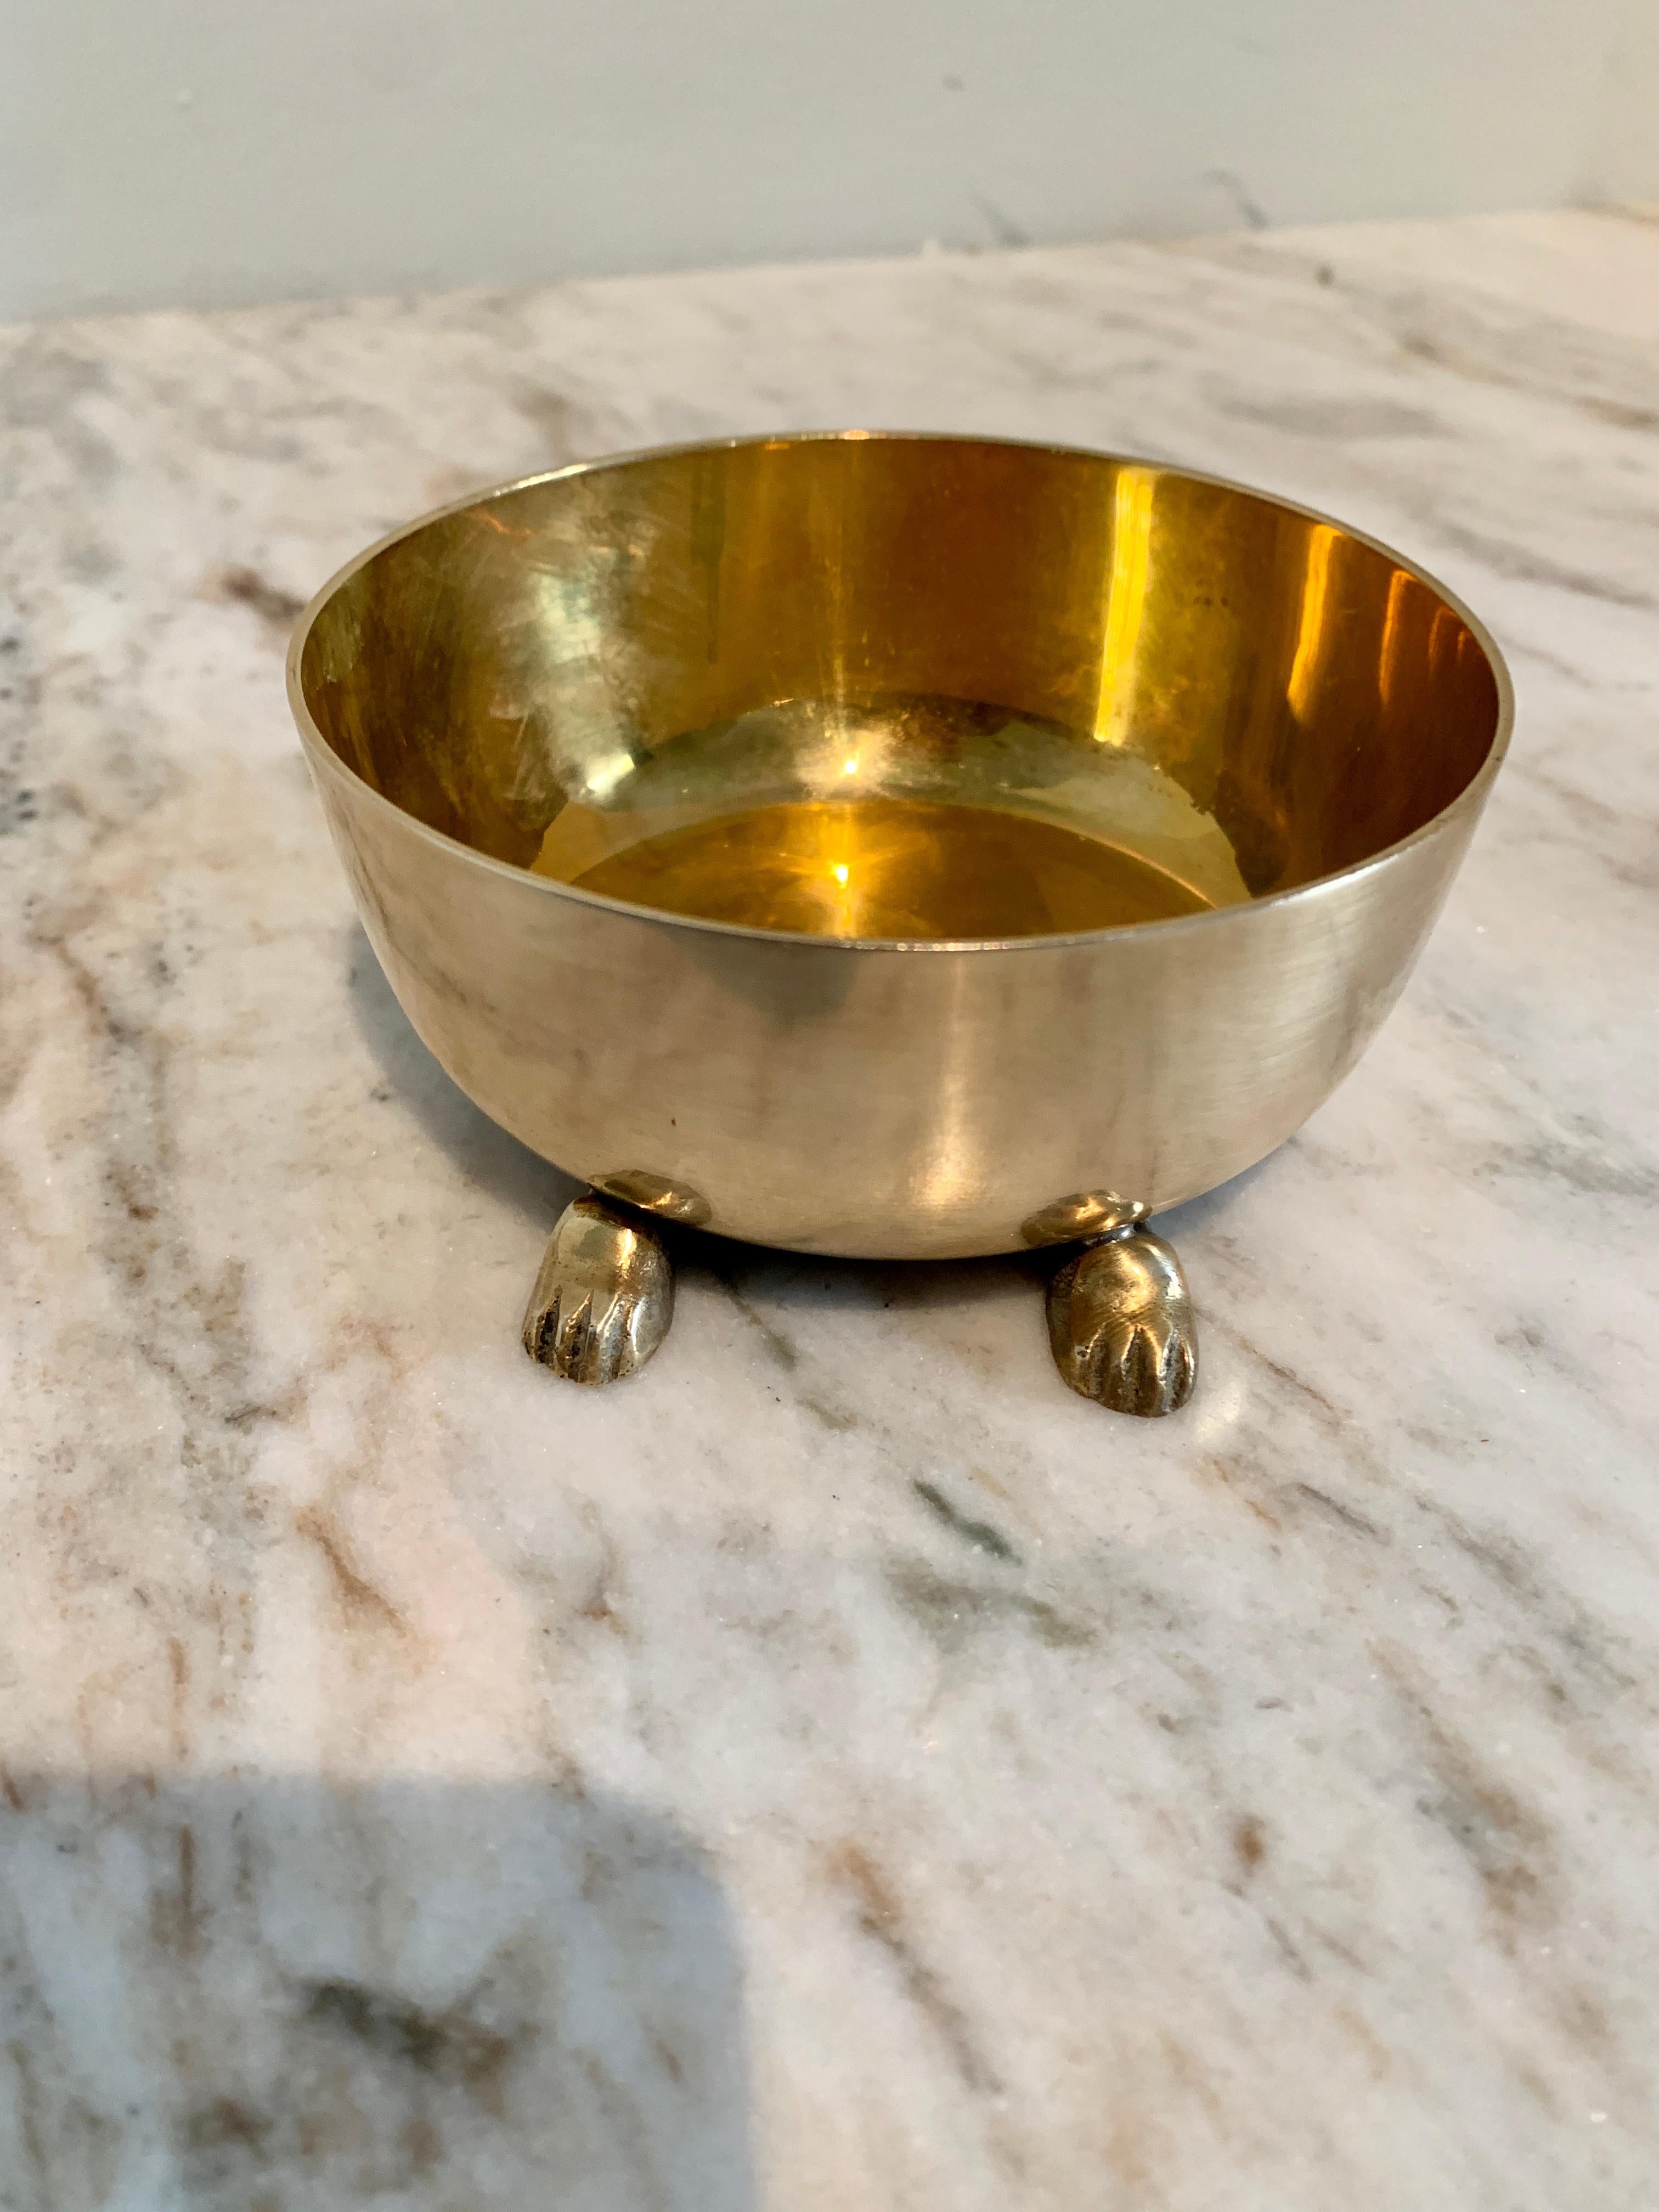 A wonderful brass box with a carved lions head and four feet. A compliment to any cocktail table or bar setting. A stash box for your 420 or better... polished and ready to make conversation of your table or smoke in your eyes... a terrific little